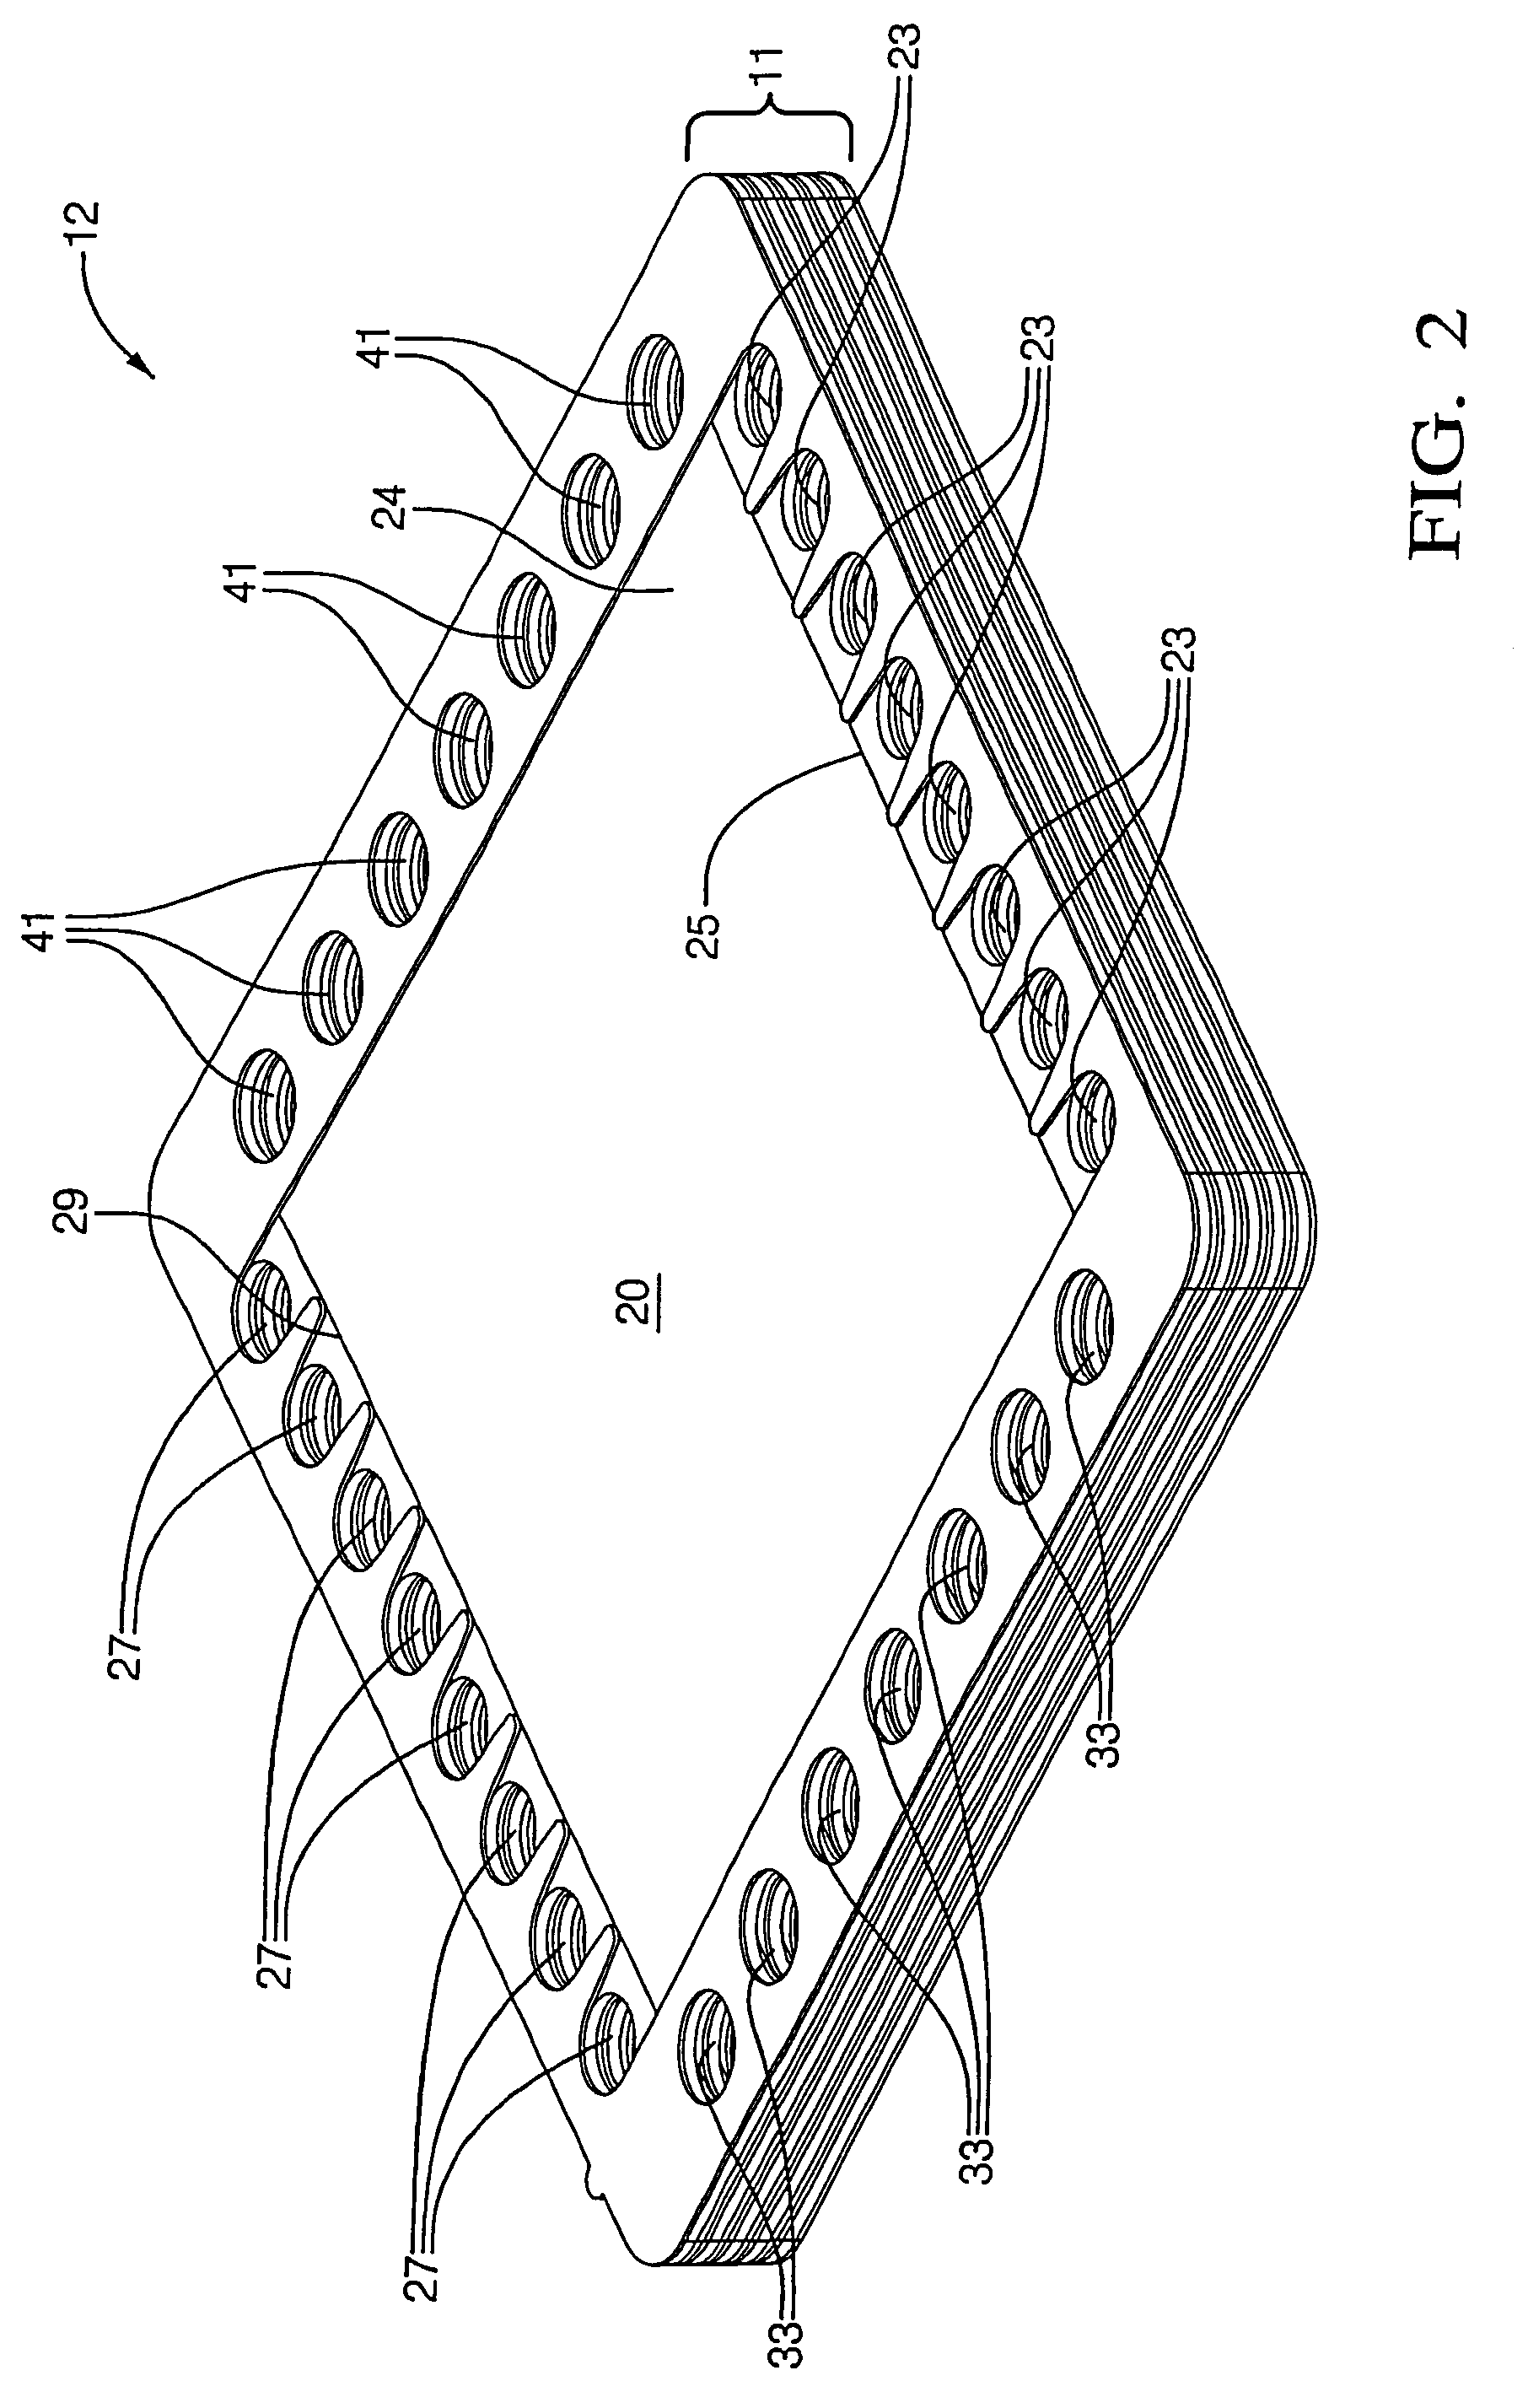 Solid-oxide fuel cell module for a fuel cell stack